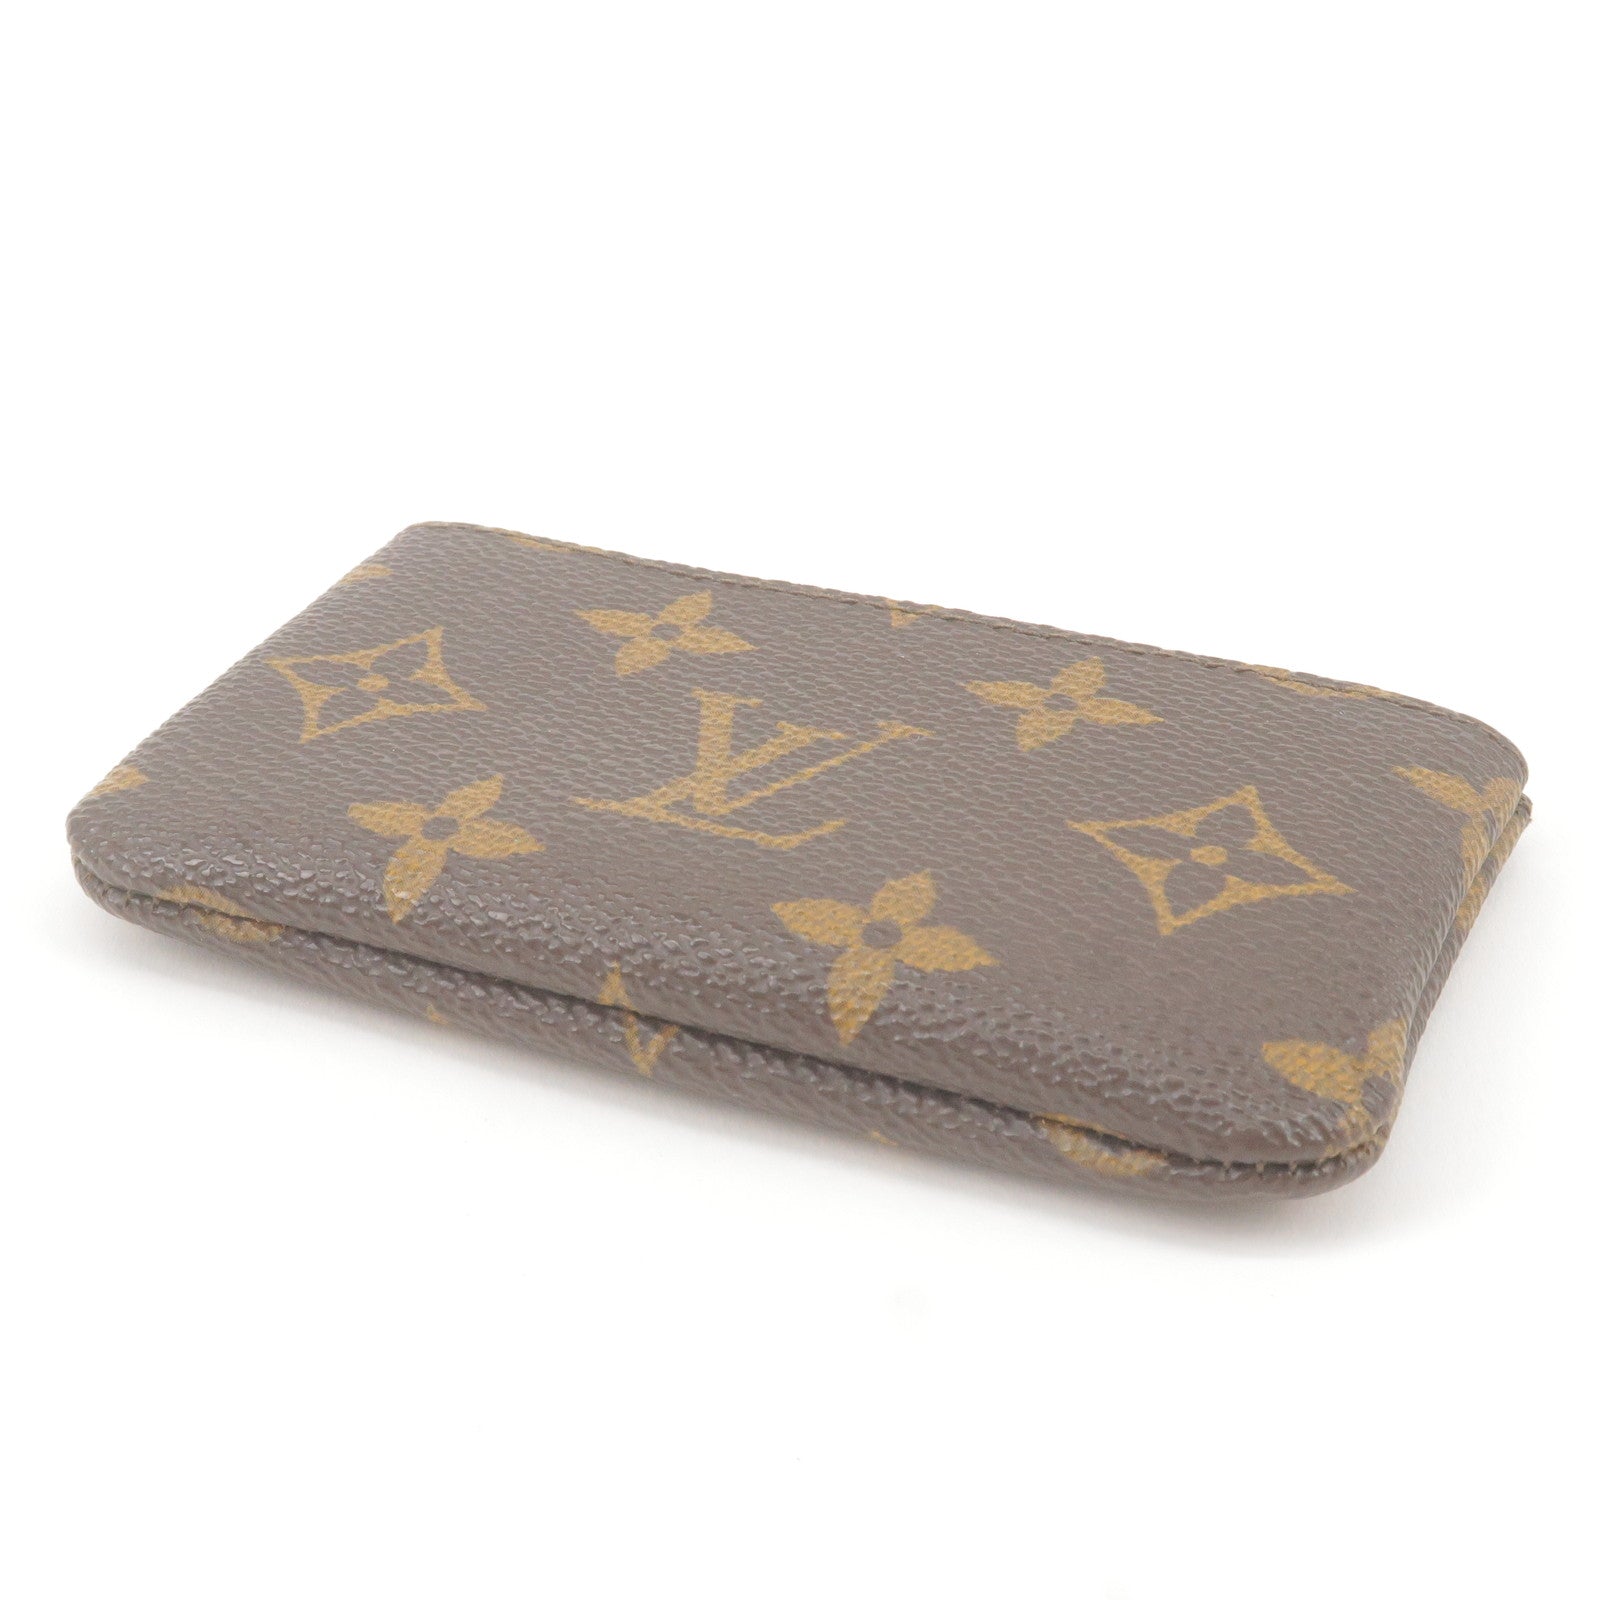 Louis Vuitton, Other, Louis Vuitton Monogram Elise Wallet With Chain  Insert And Charm